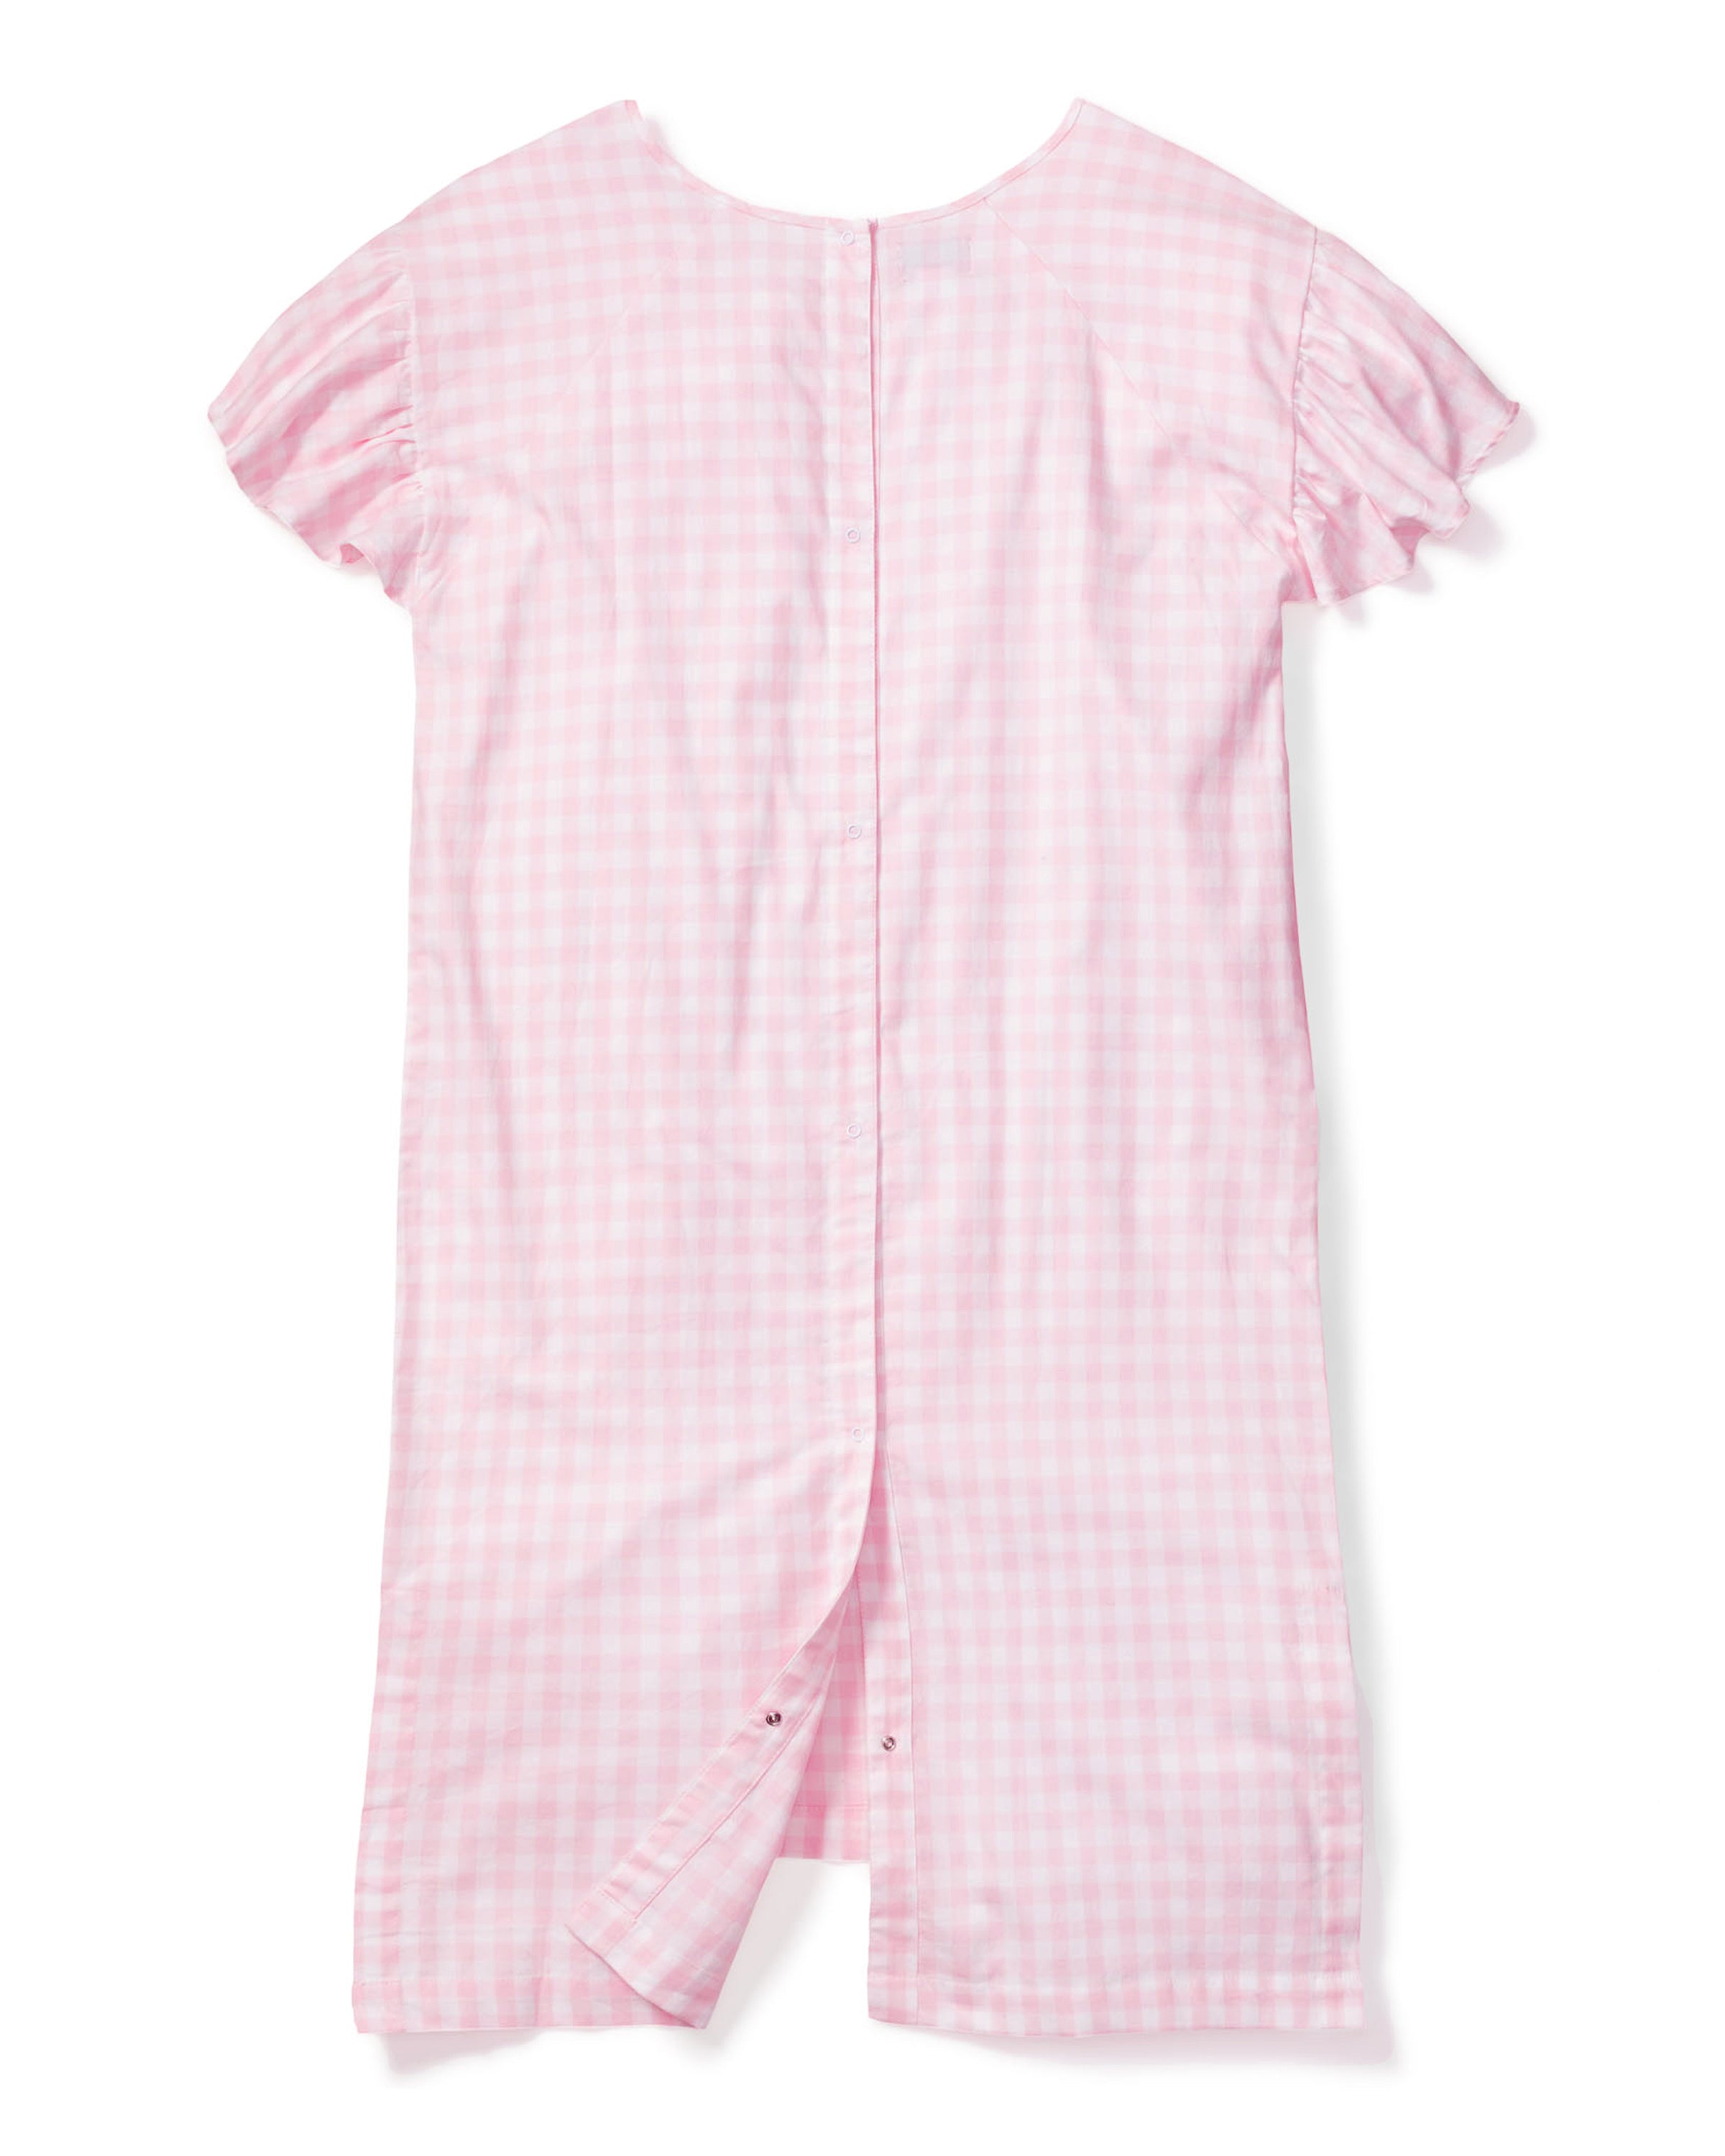 Pink Gingham Hospital Gown - Petite Plume